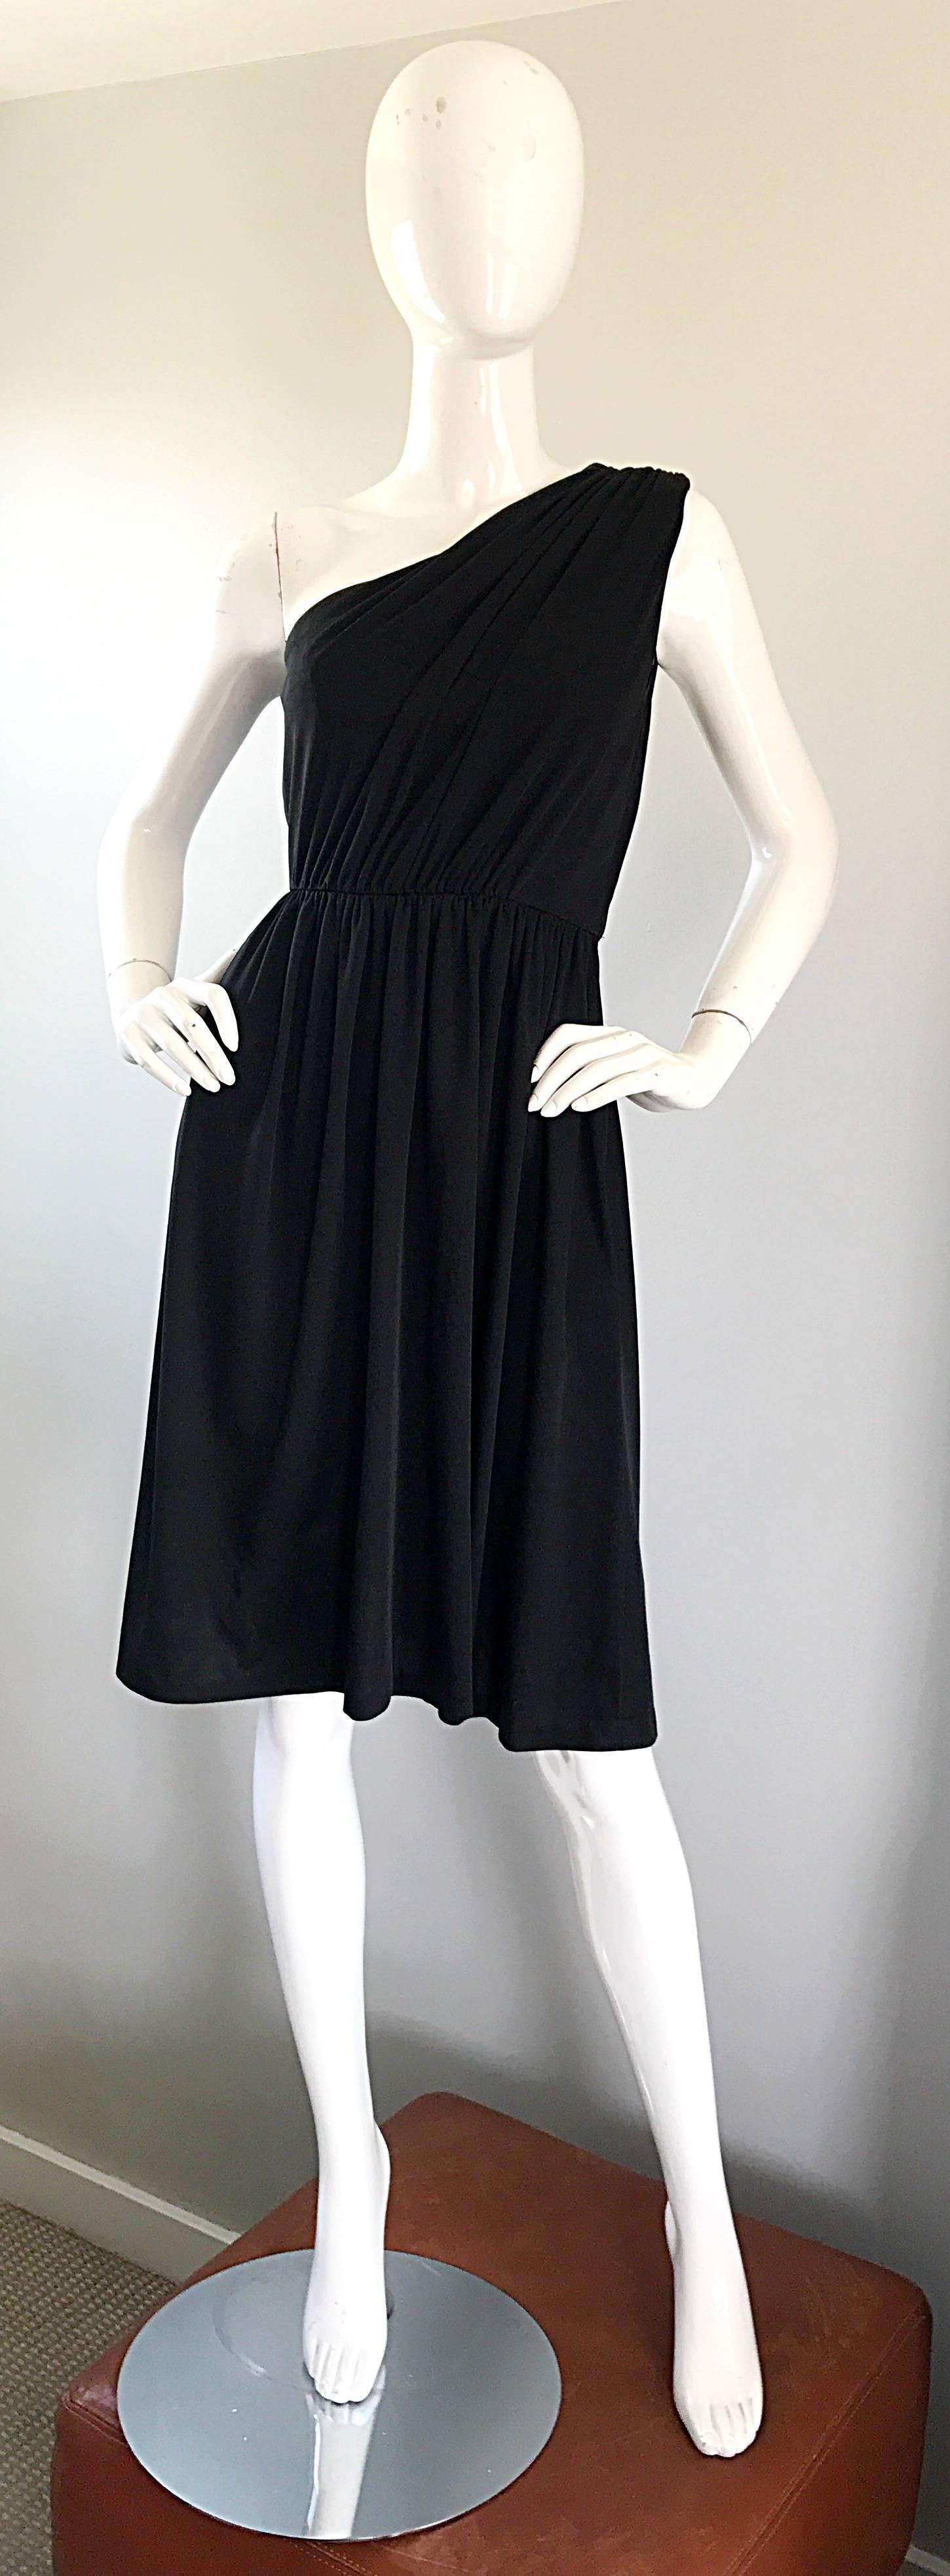 Amazing 1970s vintage ANTHONY MUTO for JOSPEH MAGNIN one shoulder black jersey dress! Beautifully draped bodice, with a free flowing knee length skirt. So much attention to detail went into the construction of this gem. Definitely has a Halston feel